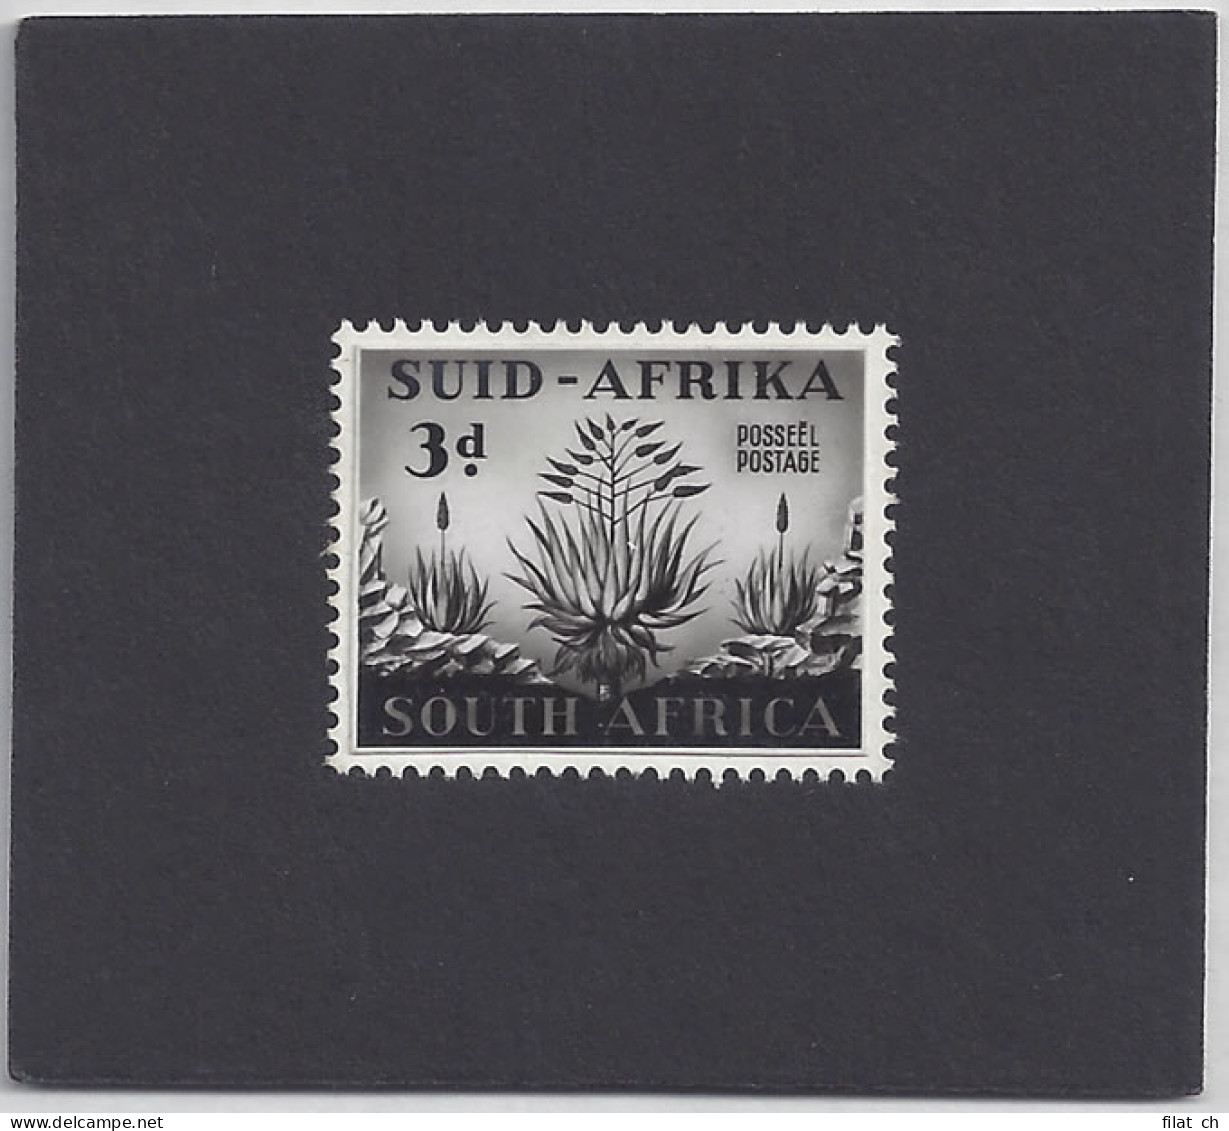 South Africa 1953c Composite Essay 3d Aloe Near-Issued - Unclassified